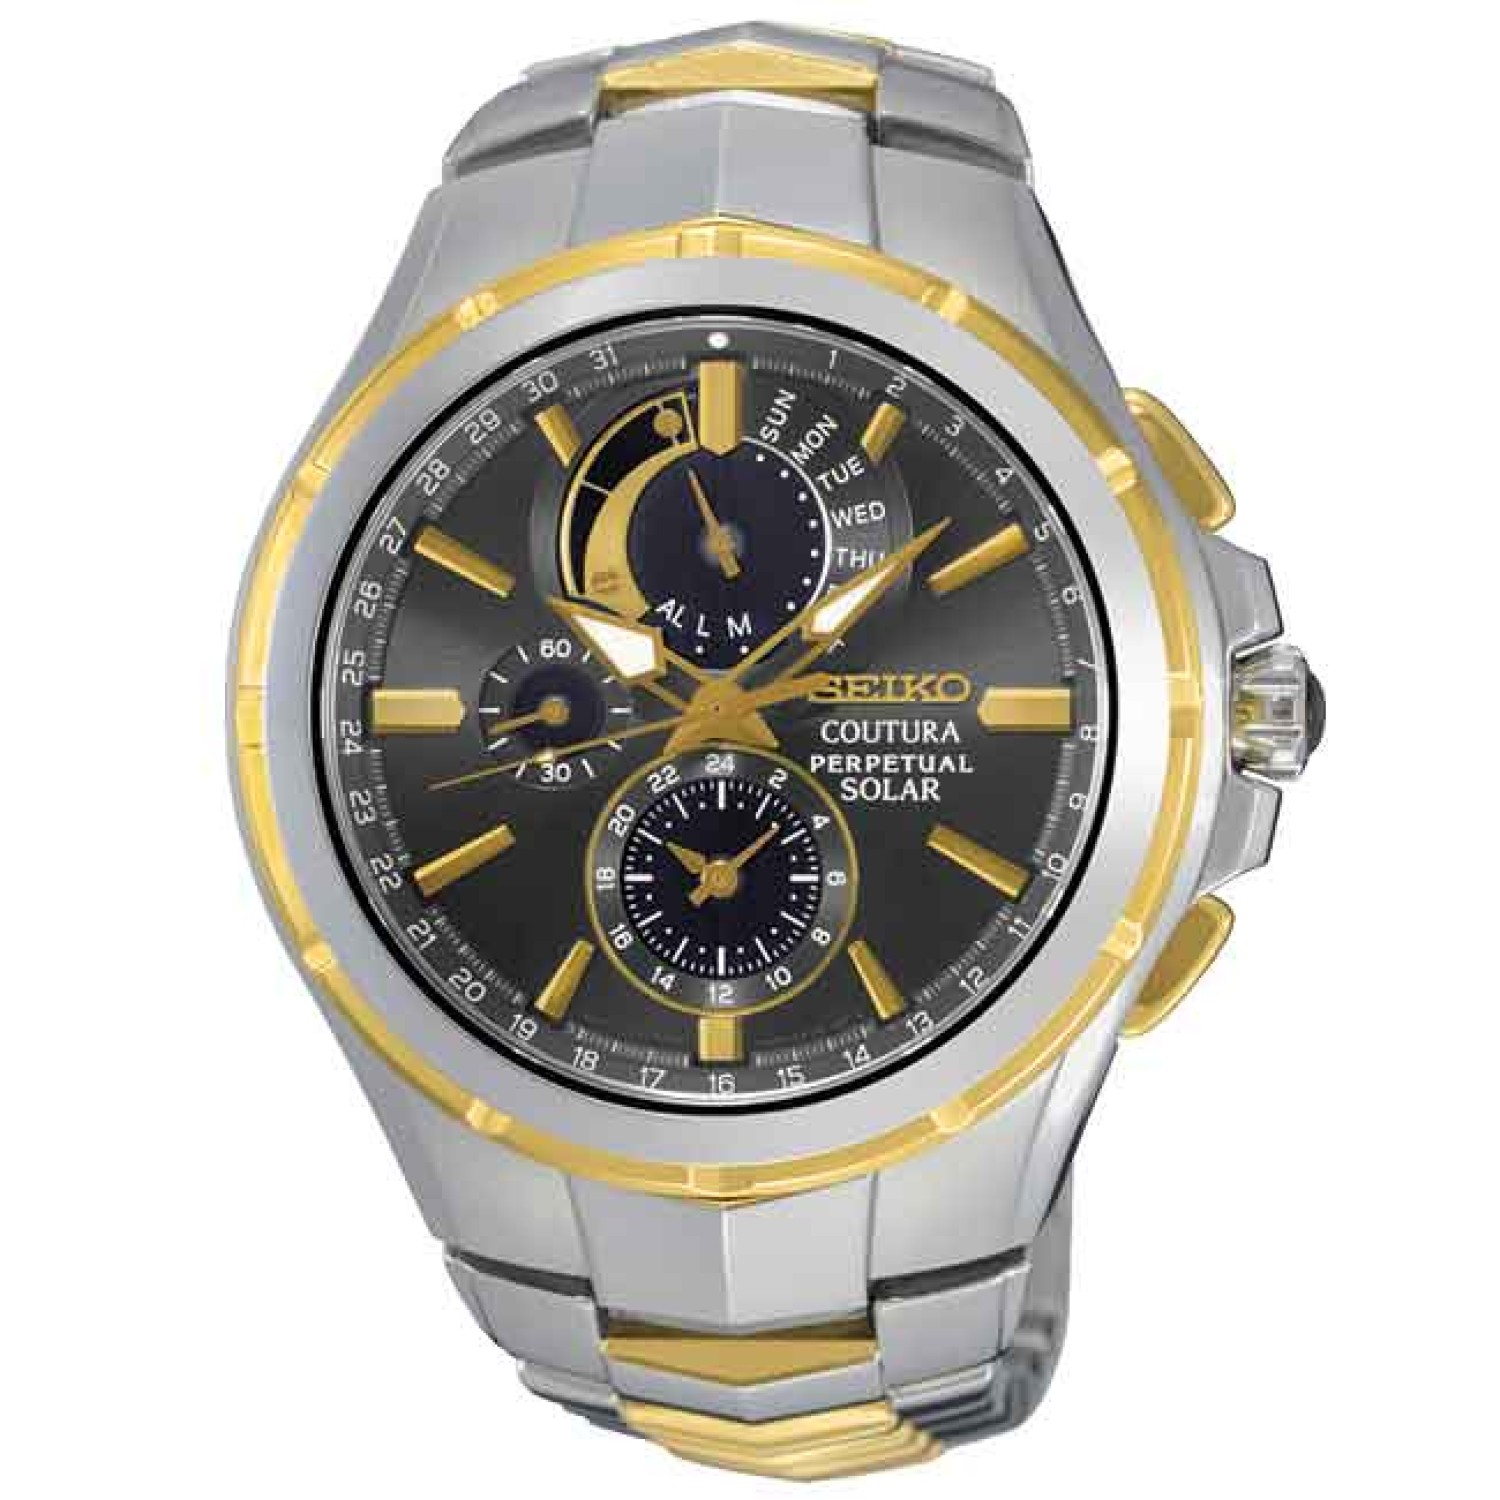 SSC376P-9 Seiko Mens Coutura Perpetual Solar Watch. The Seiko Coutura Perpetual SSC376P9 case is made out of Two-tone steel/gold plate, which stands for a high quality of the item and the Grey dial gives the watch that unique look.   LAYBUY - Pay it easy,